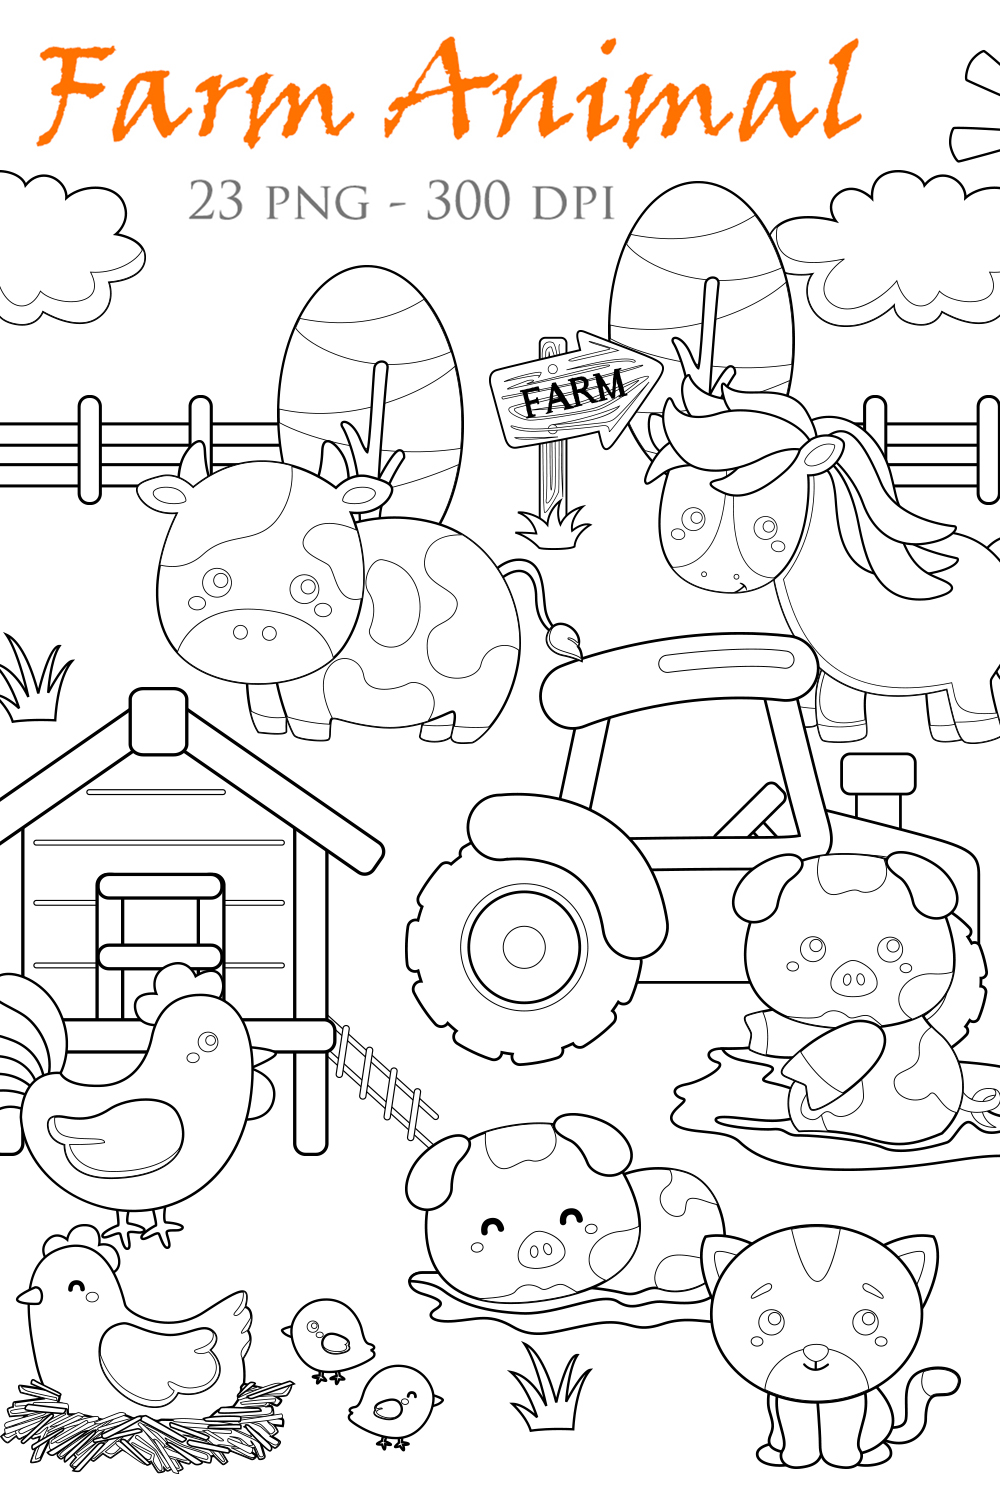 Farm Animal Barn Tractor Cow Chicken Pig Horse Cat Digital Stamp Outline pinterest preview image.